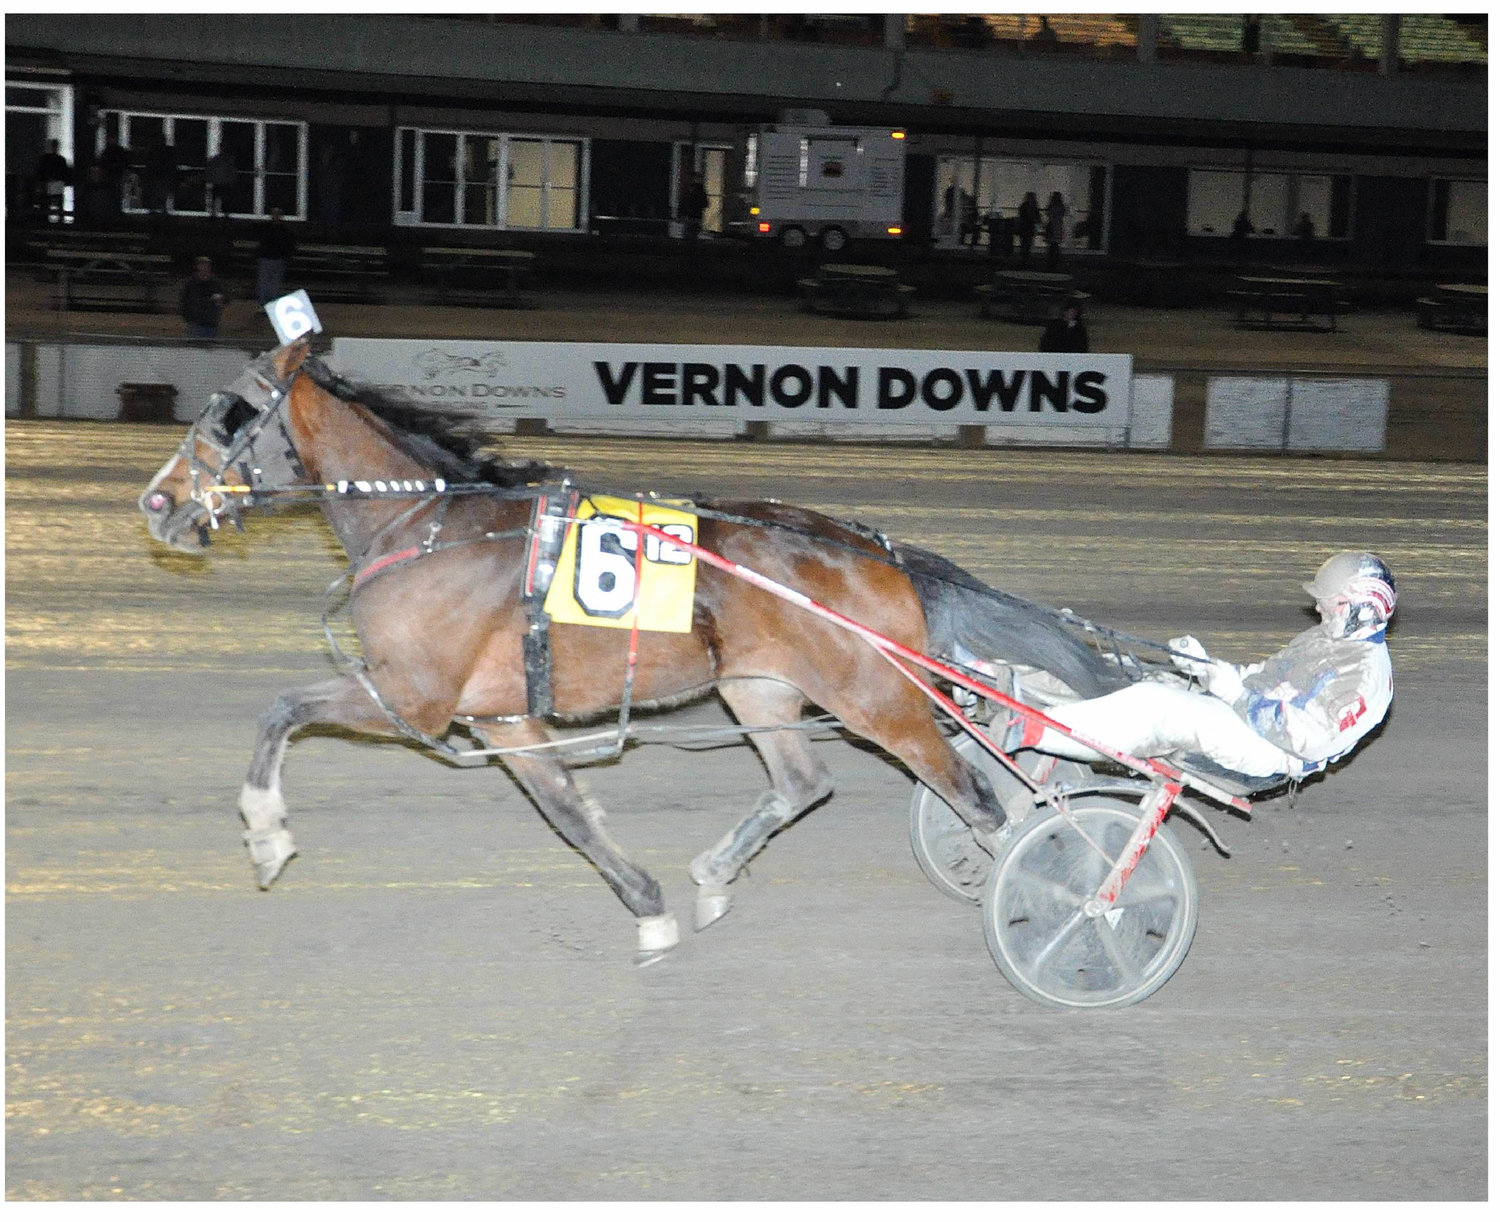 WIN STREAK — Dewey Arnold and driver Truman Gale won the $7,000 open trot co-feauture. It was the horse's fourth win in a row. He moved into first on the backstretch and cruised to a win in a seasonal best of 1:54.1.